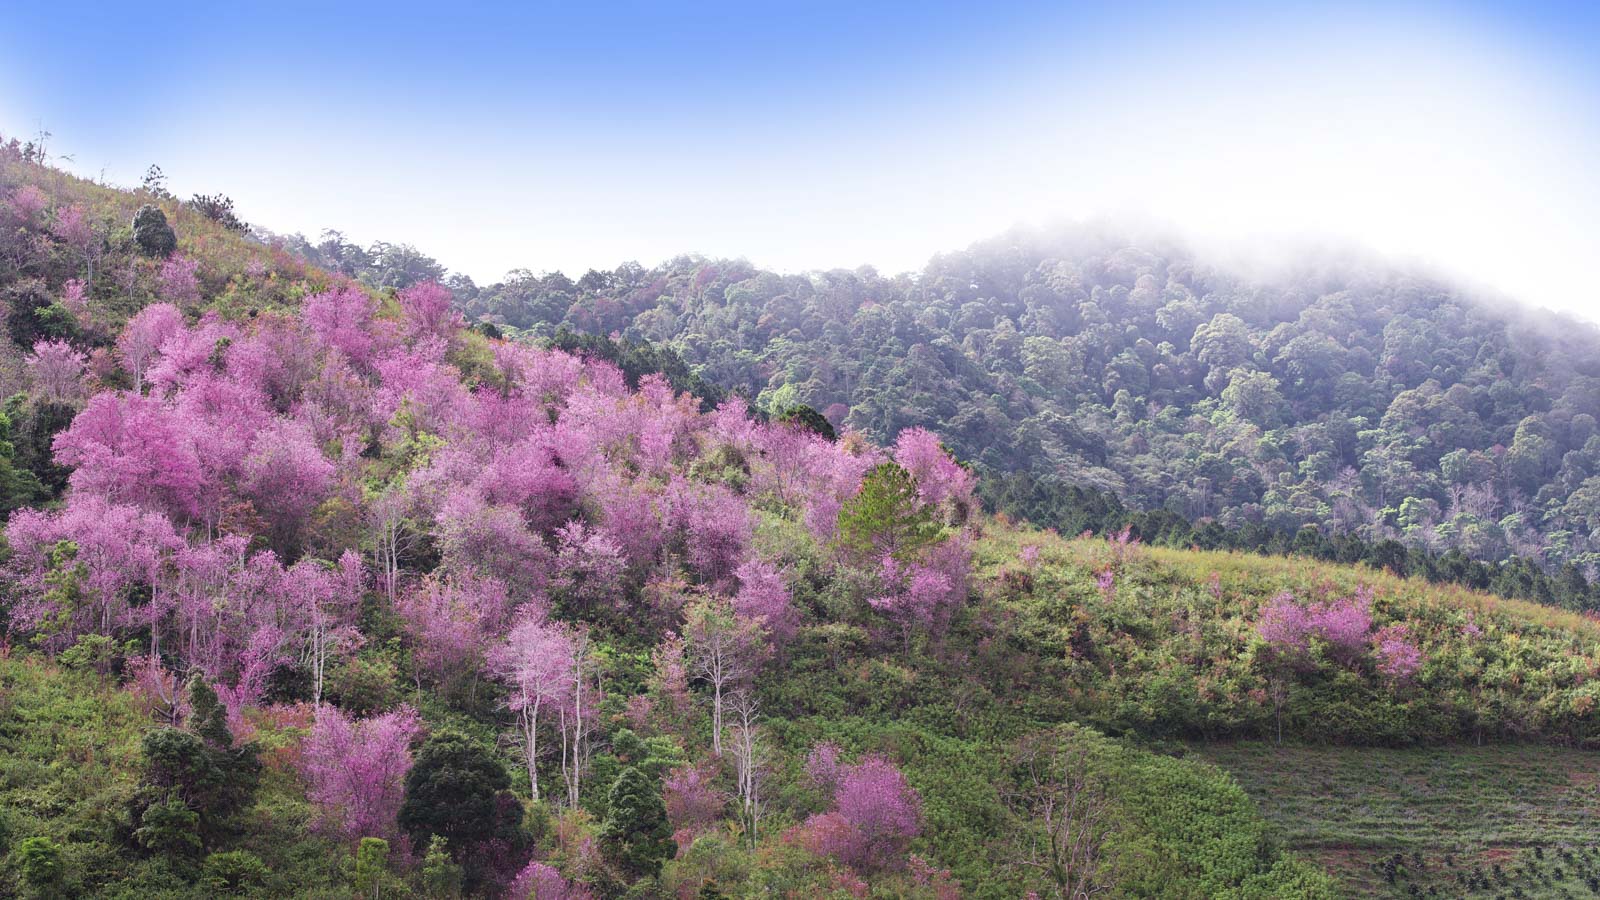 Cherry blossoms in Asia in bloom on a hillside in Vietnam